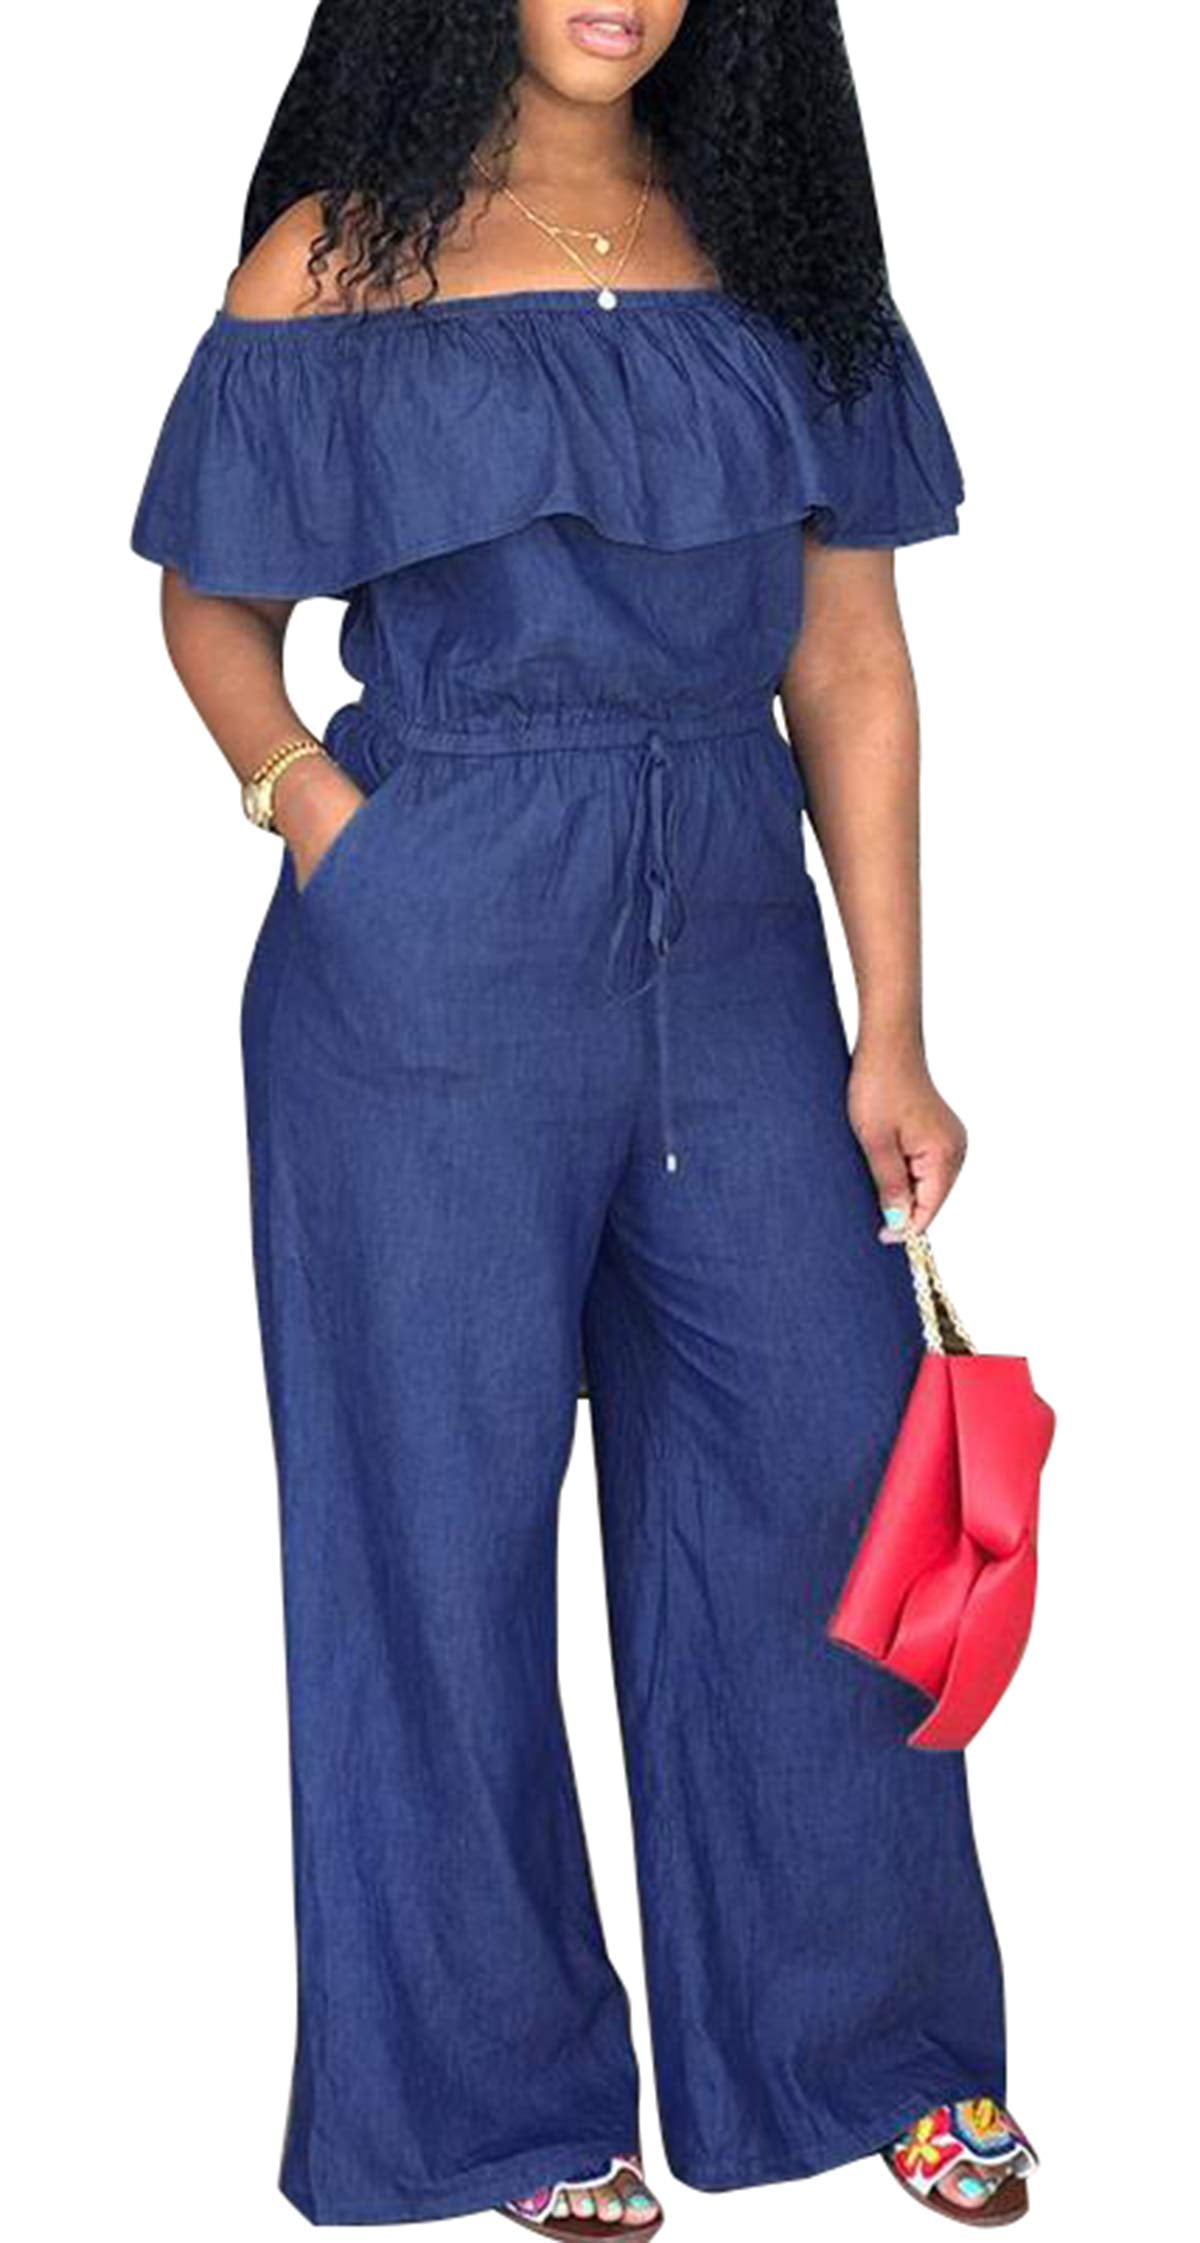 maydaiyar Casual Rompers Womens Jumpsuit Plus Size Denim Overalls Print Flower Holes